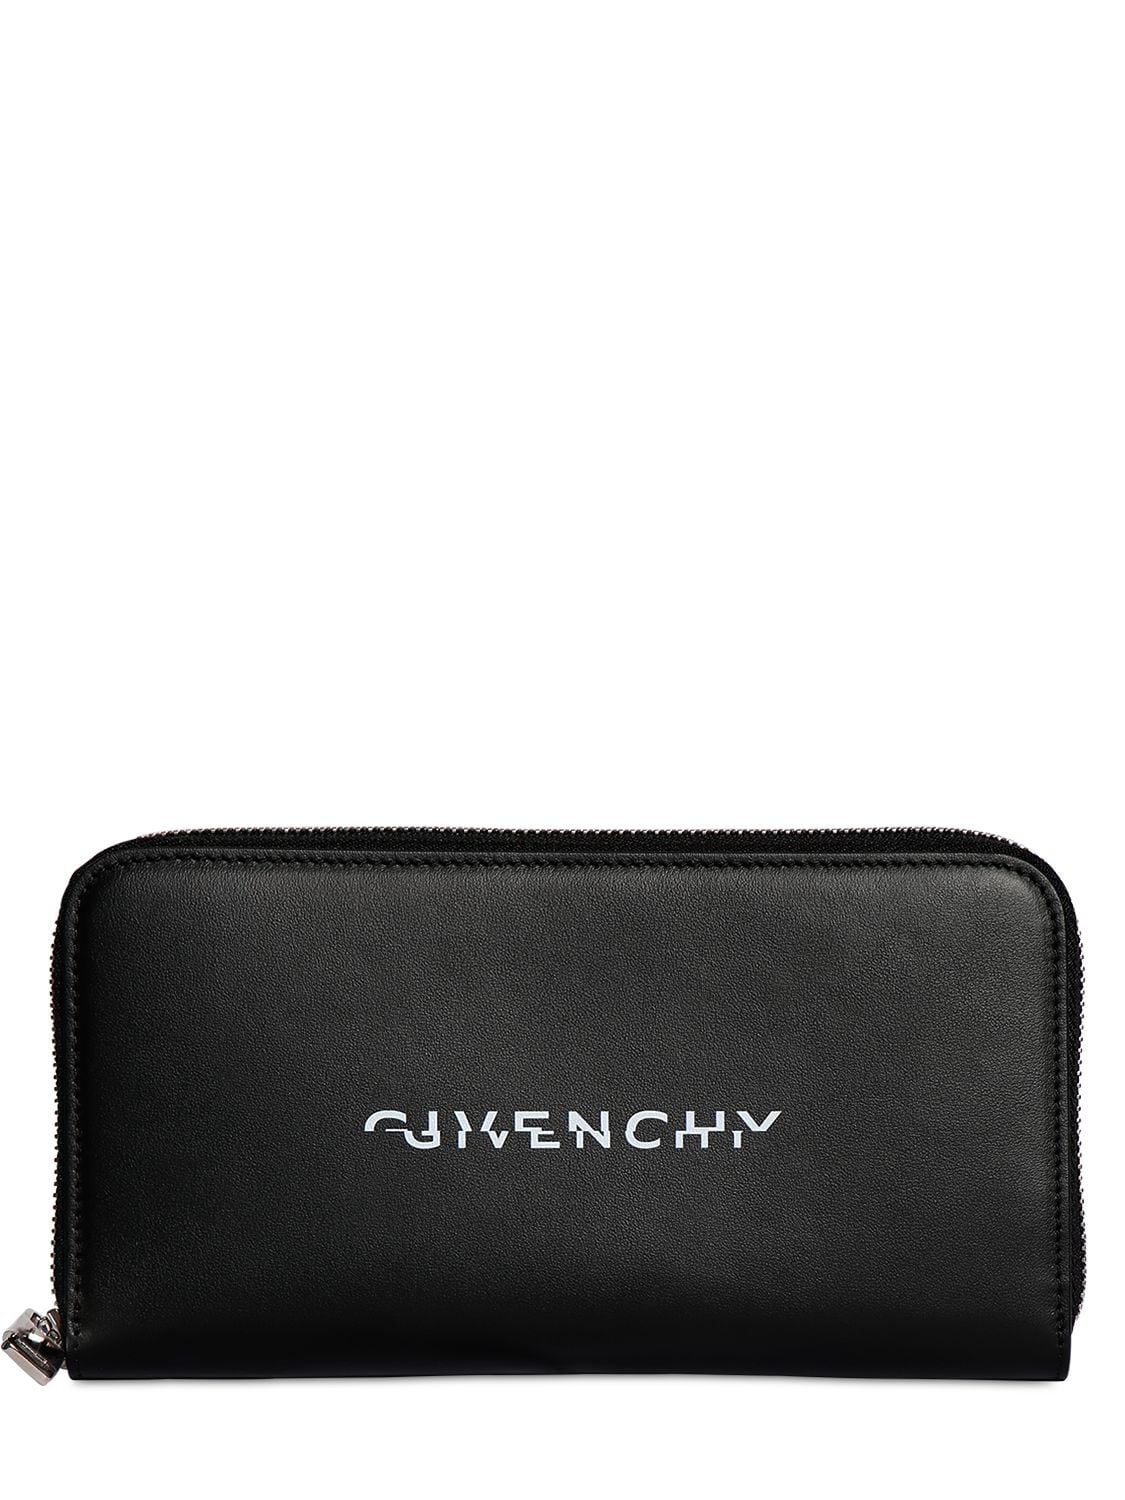 Givenchy Zip-around Leather Wallet In Black